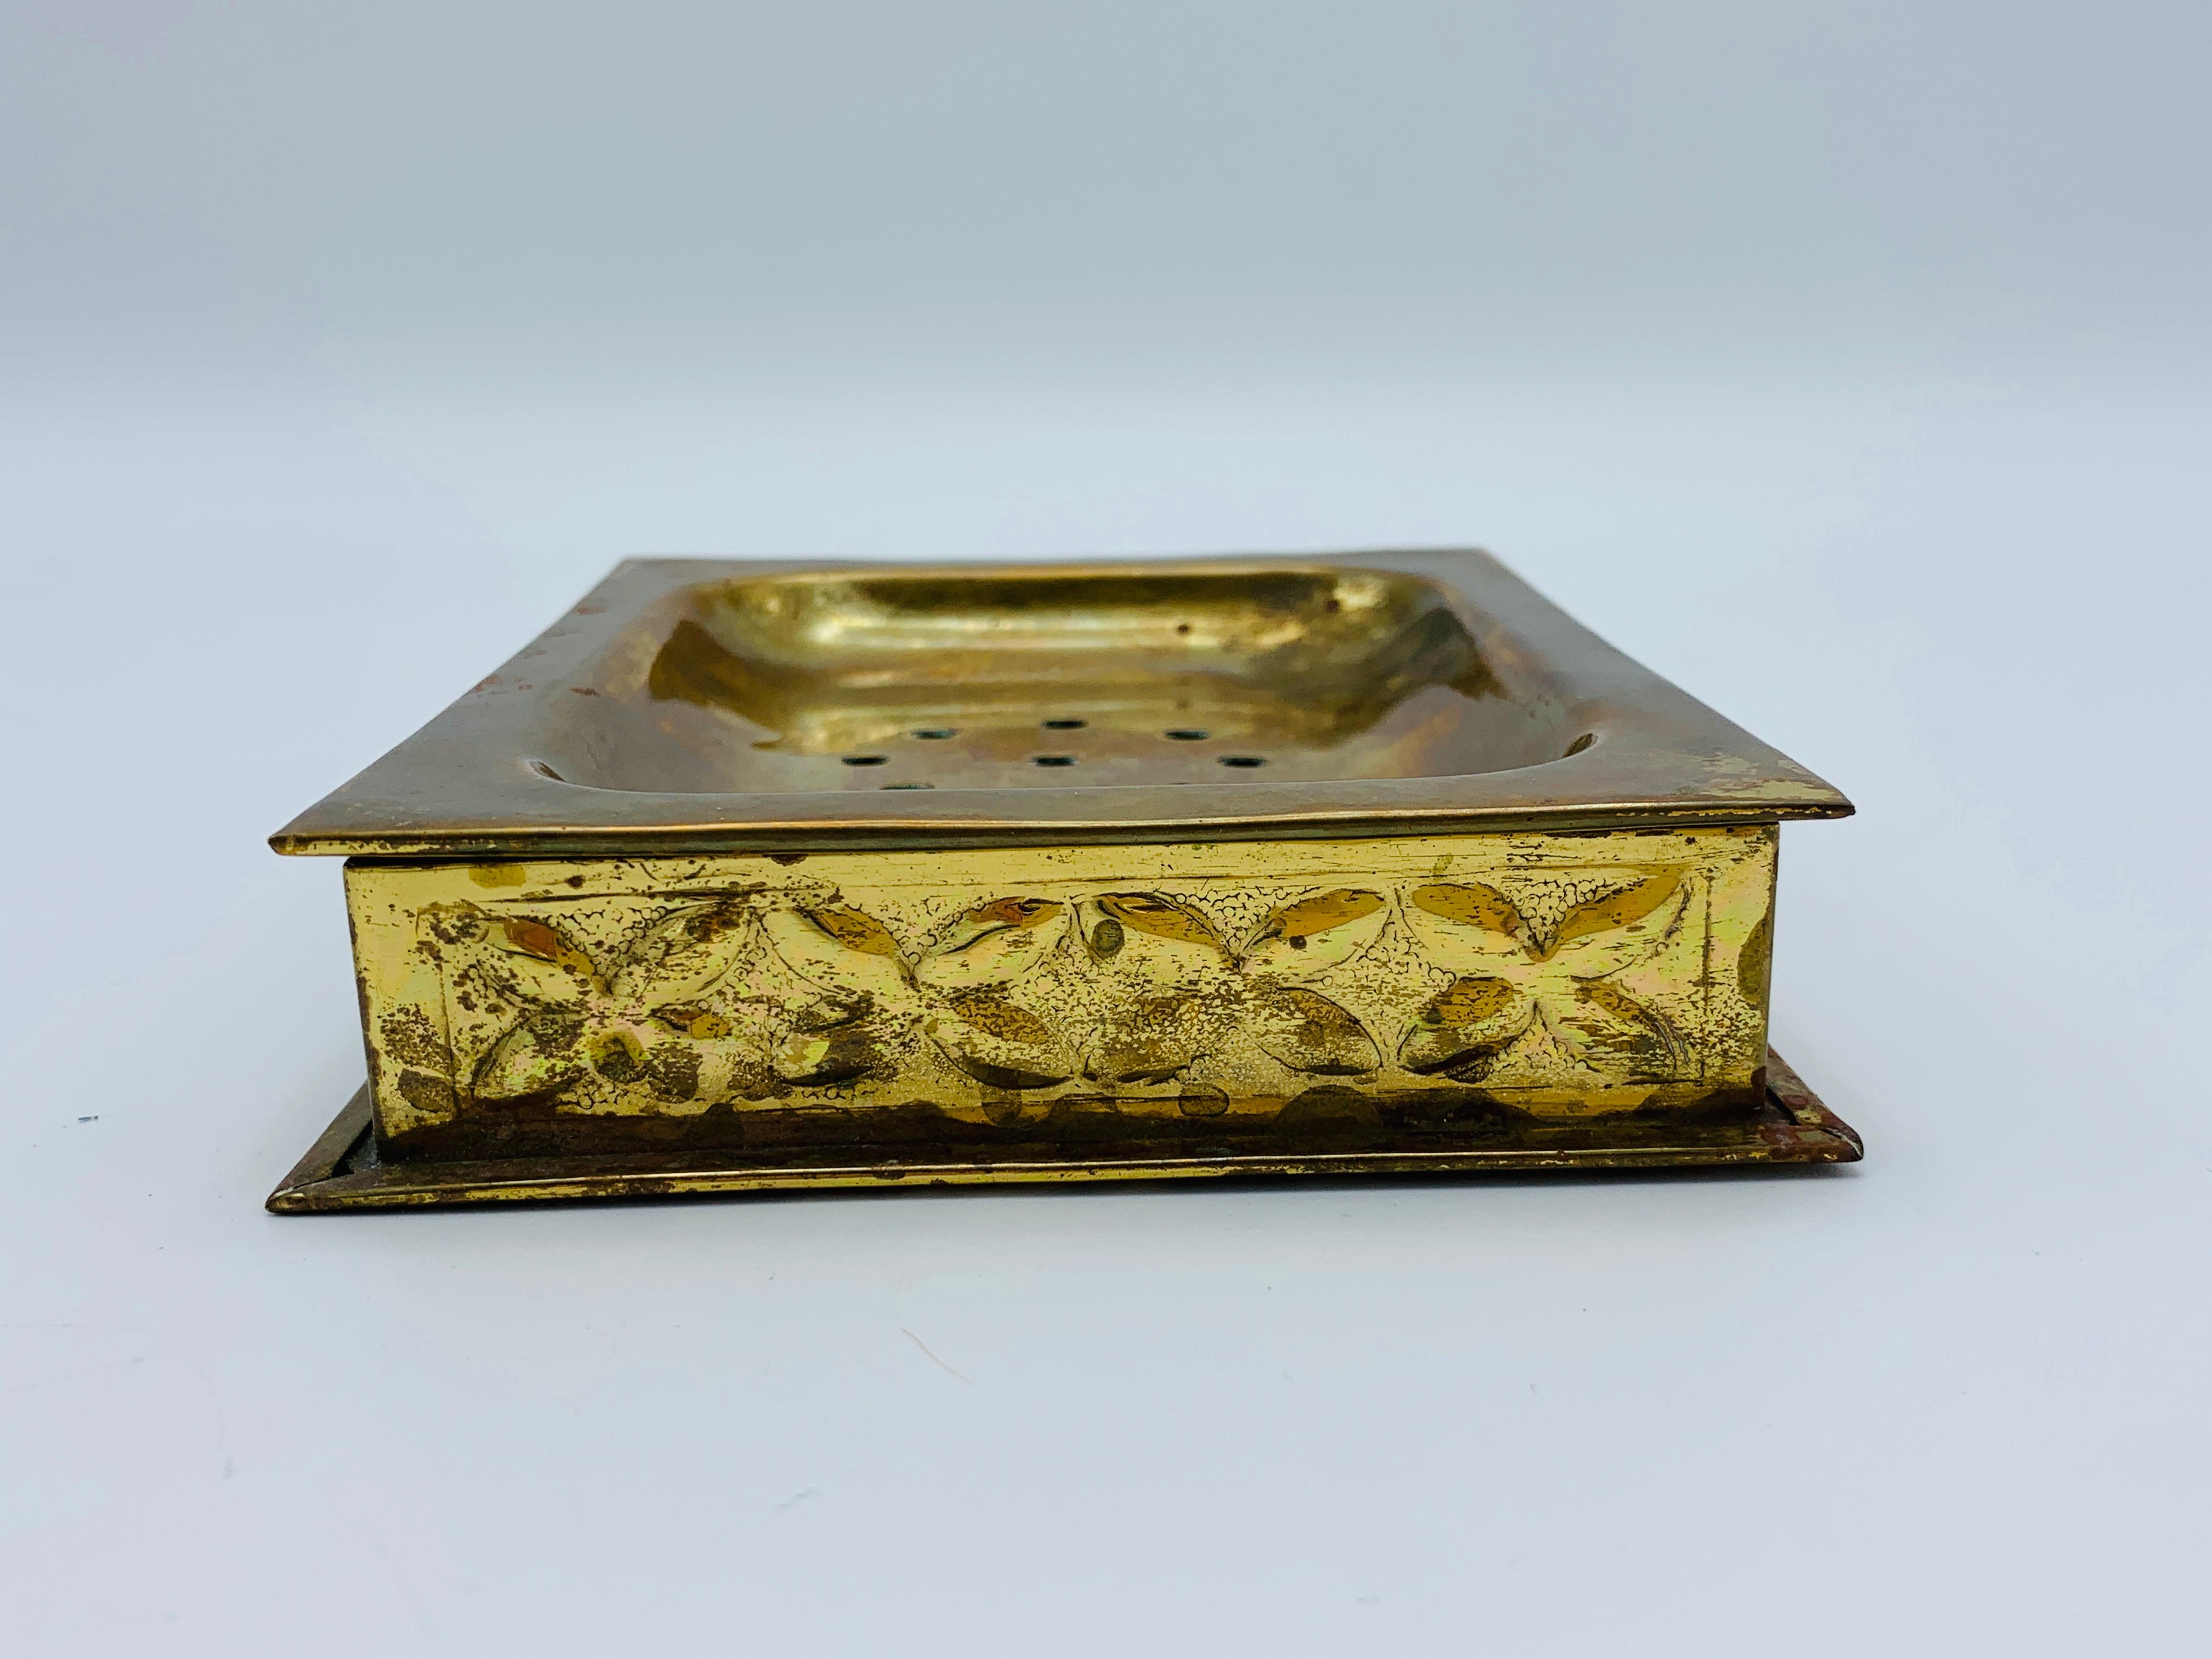 Listed is a gorgeous, 1970s Sarreid style brass hand-soap dish for a vanity or counter top. Top removes from base for cleaning. Lovely all-over patina, expected with age, see photos for reference. This piece definitely has a boho gone Hollywood